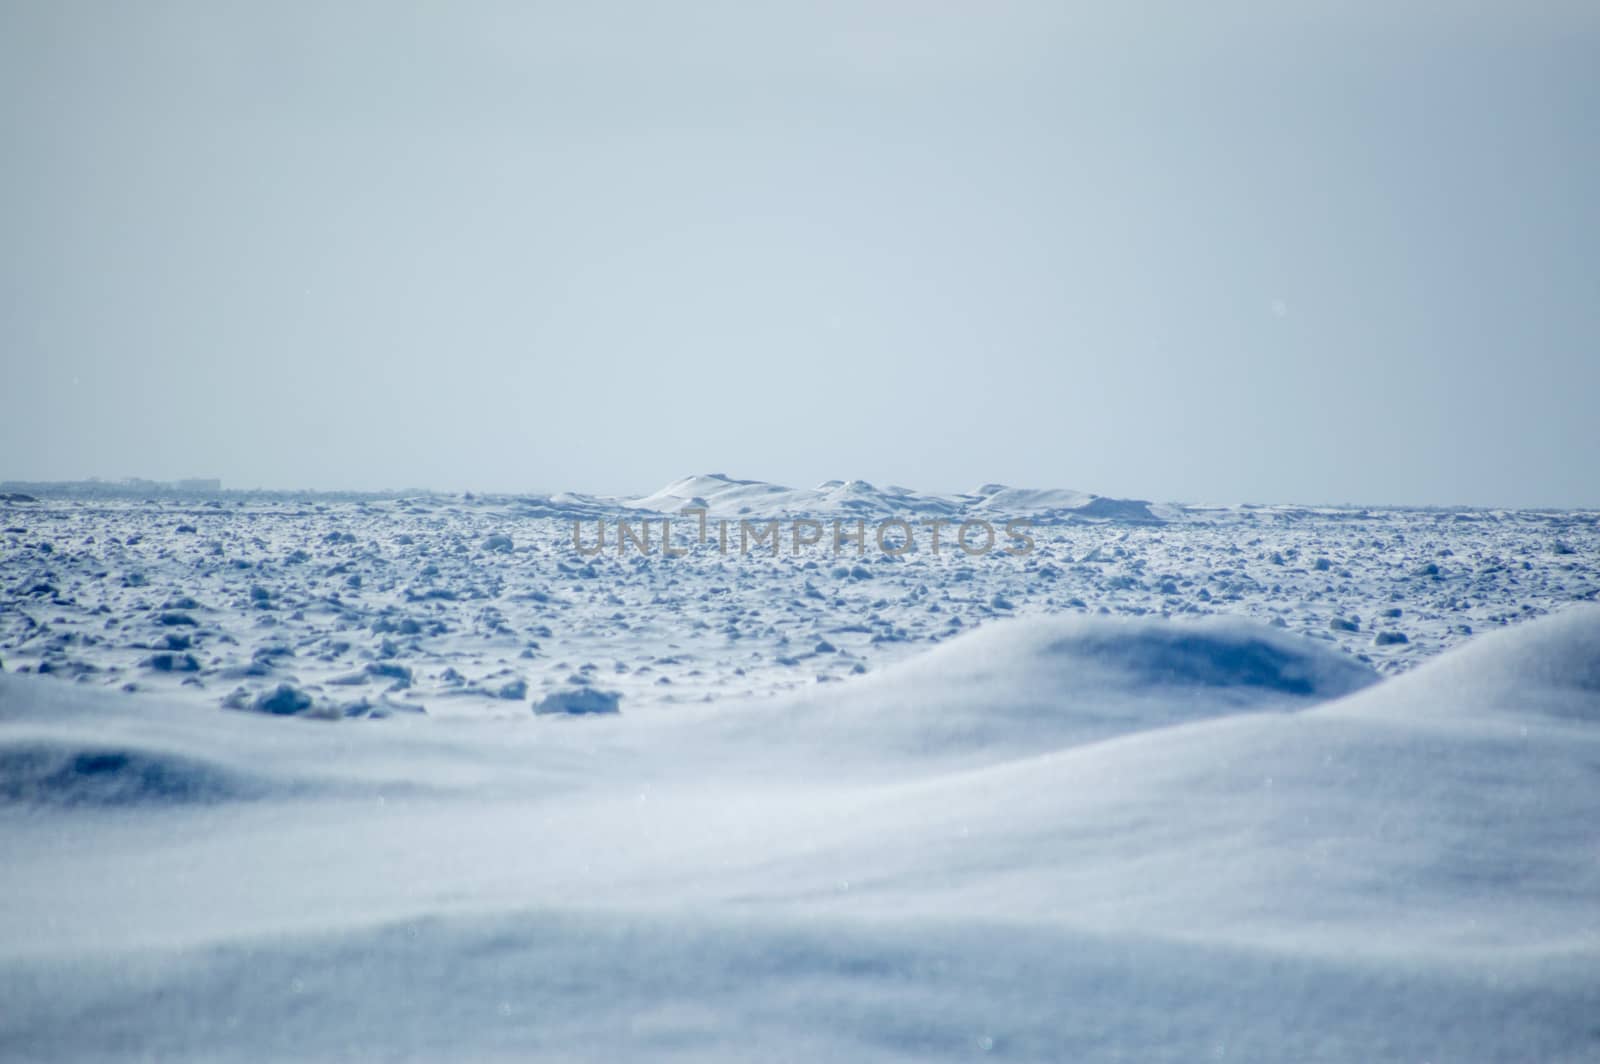 Wintry Lake huron icebergs and snow dunes landscape.